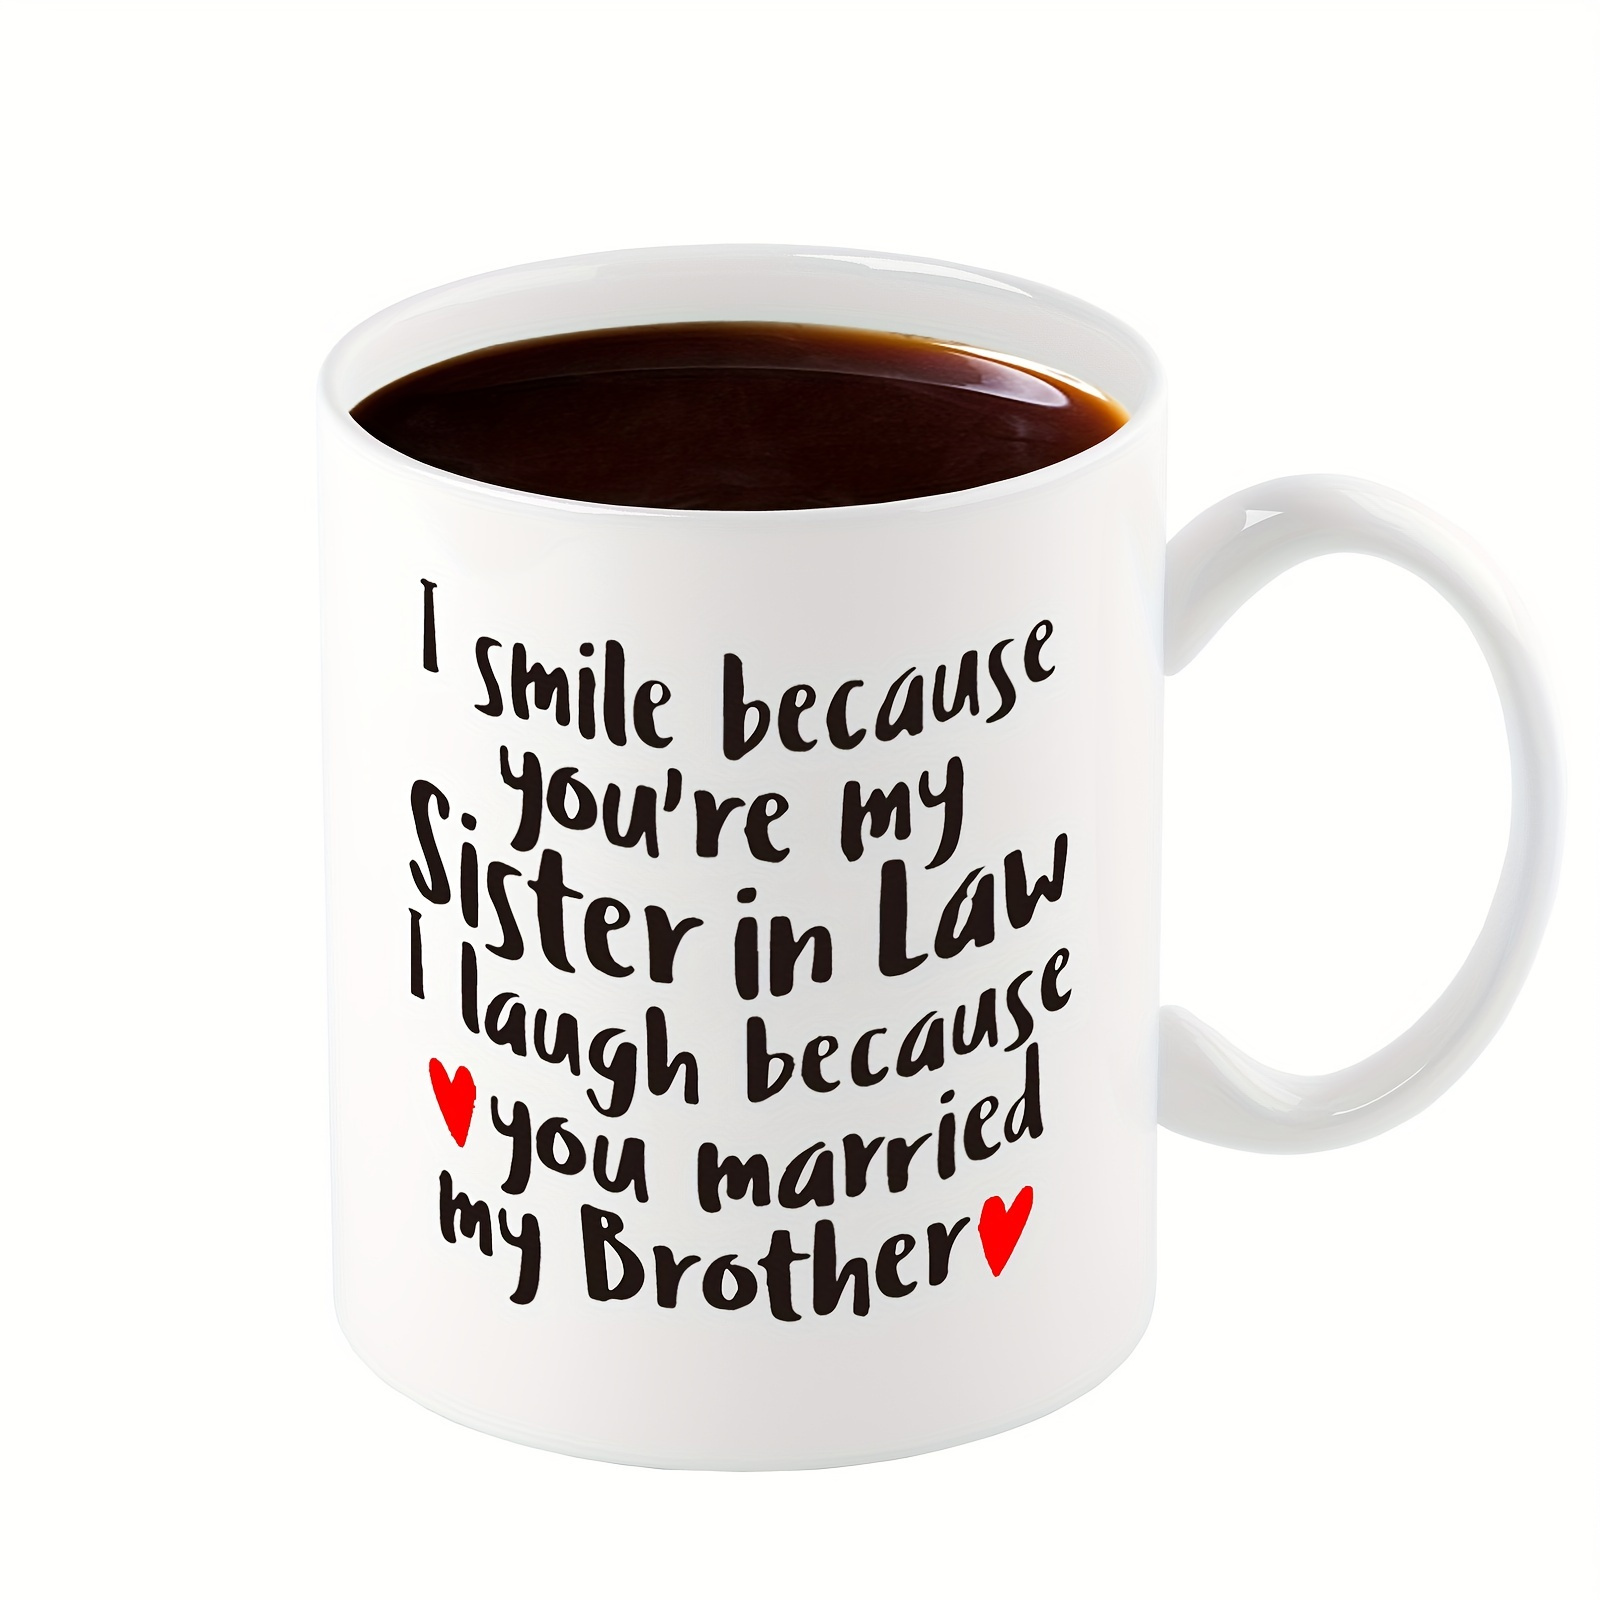 

1pc, Sister In Law Ceramic Coffee Mug, 11oz Coffee Cup, Funny Sister In Law Birthday Gift, Sis In Law Engagement, Wedding Gift, New Sister In Law, Sil To Be, Christmas, I Smile Because Sis In Law